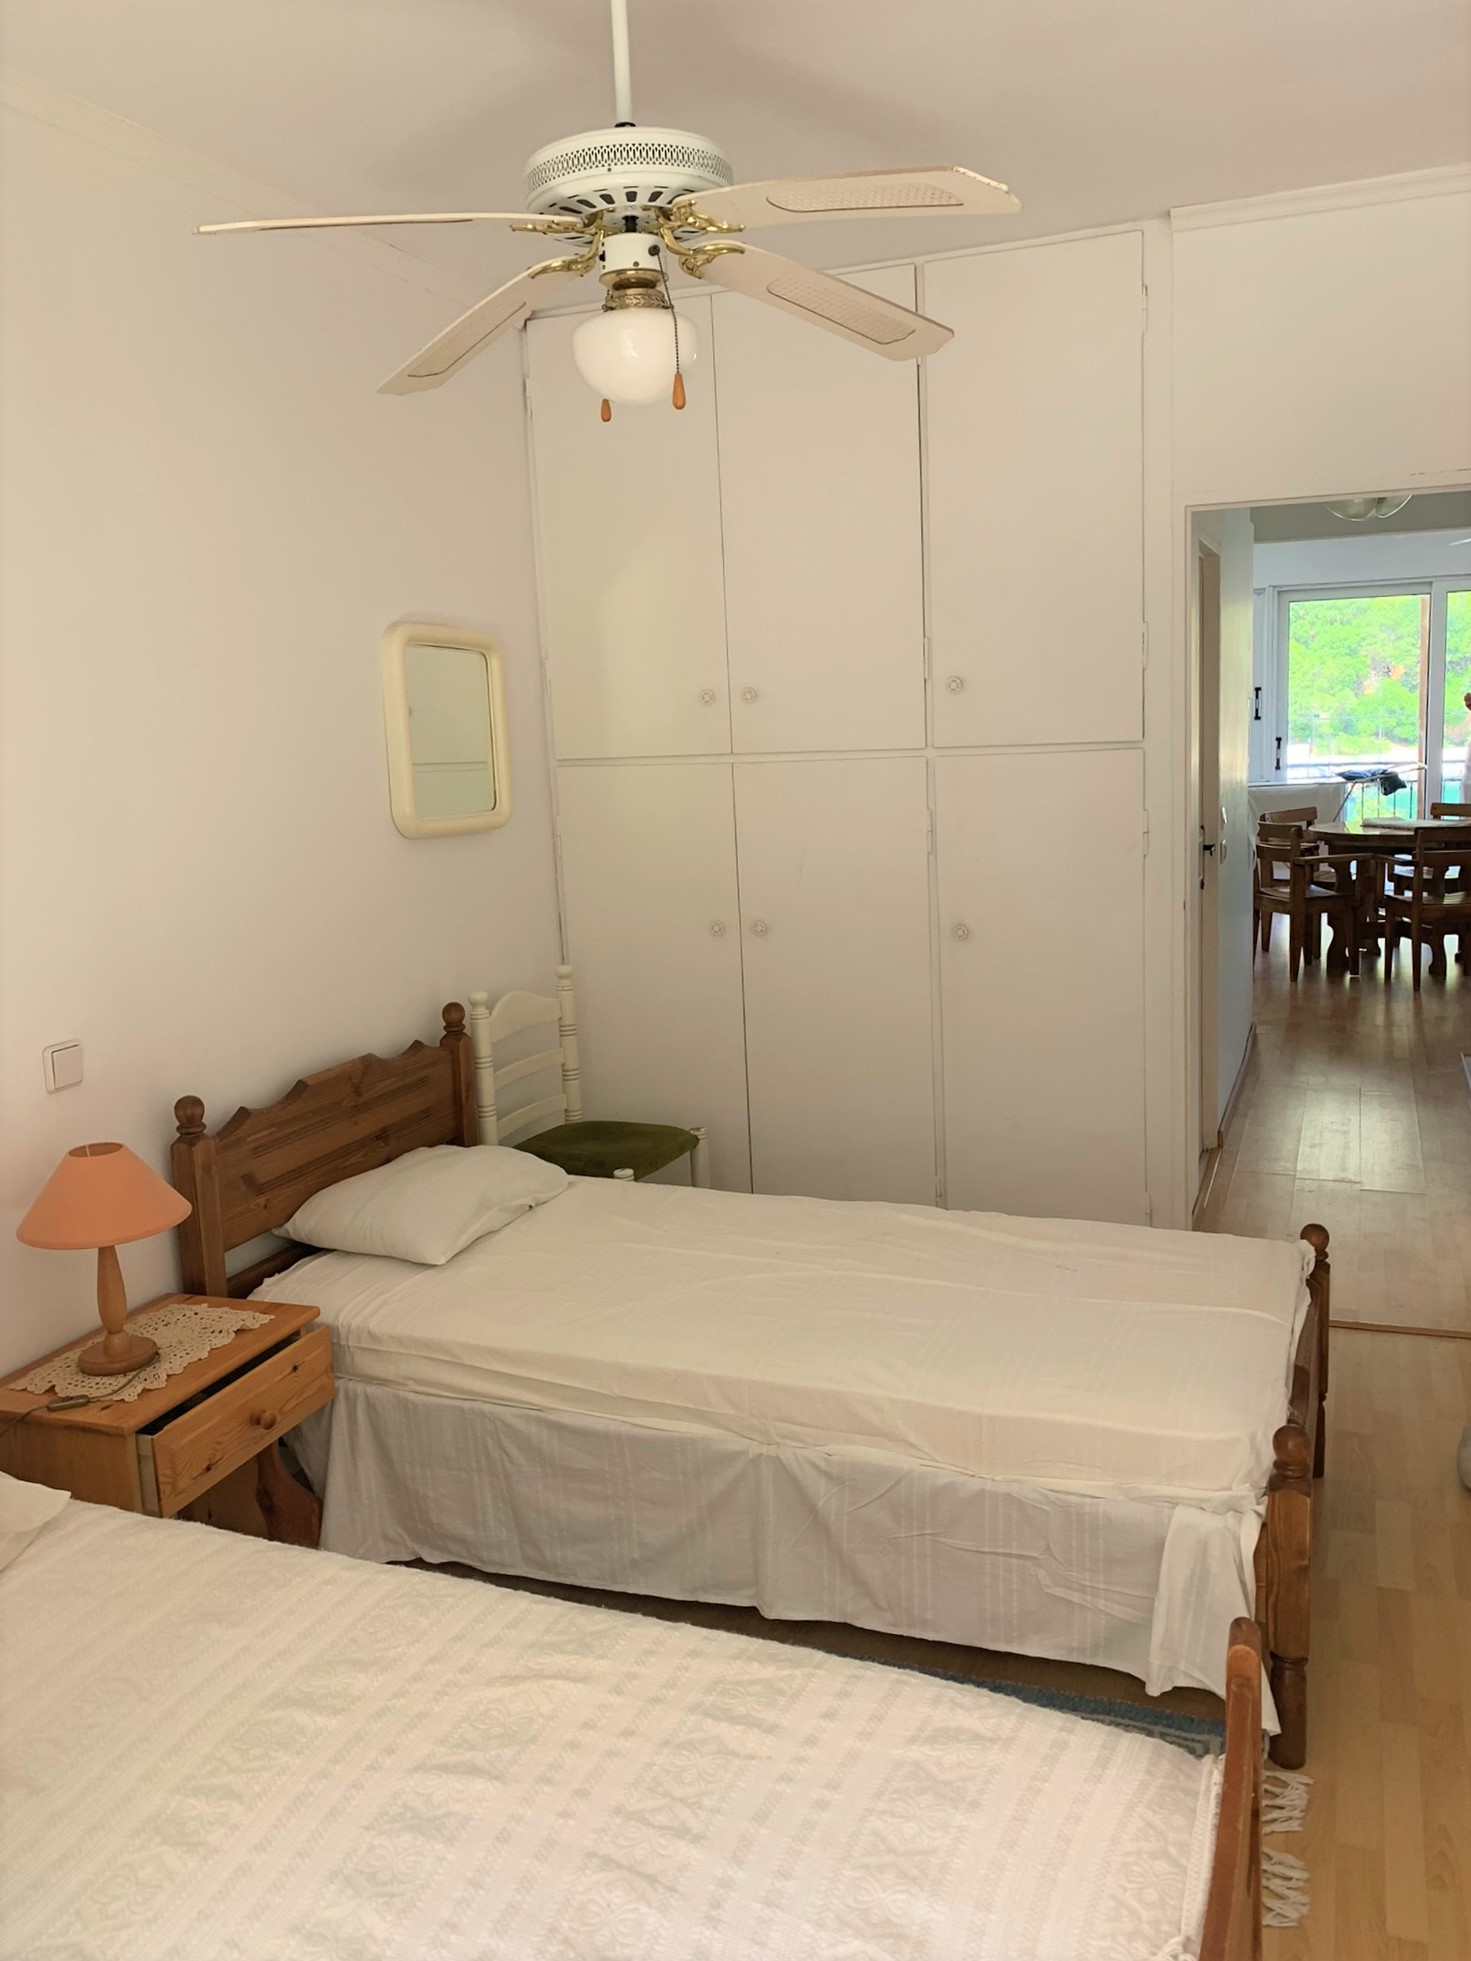 Bedroom of house for sale in Ithaca Greece, Frikes